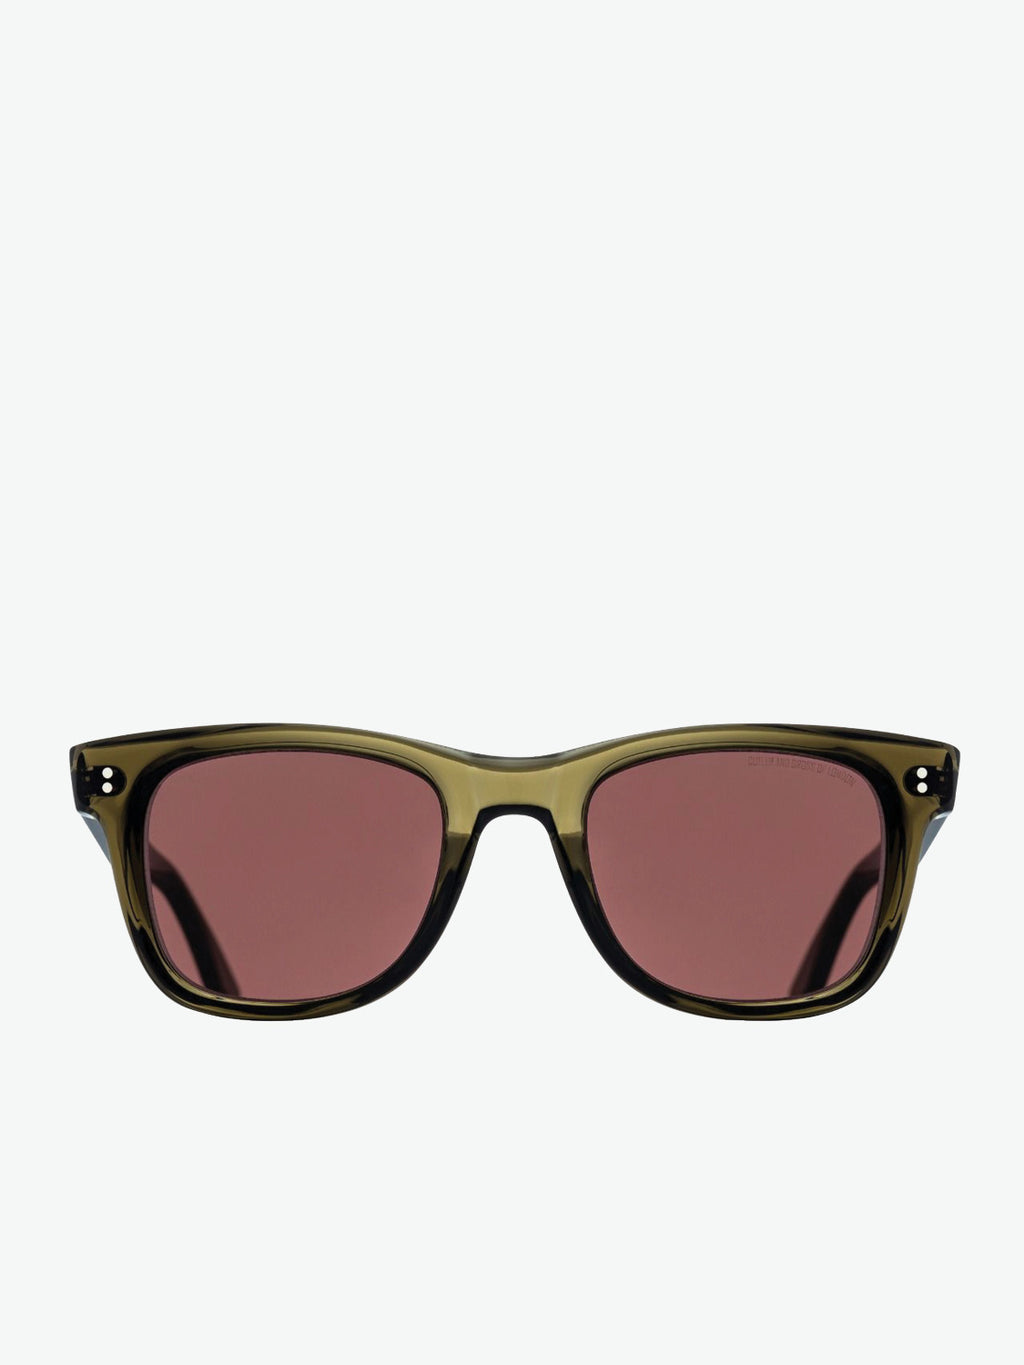 Cutler and Gross 9101 Square Sunglasses Olive